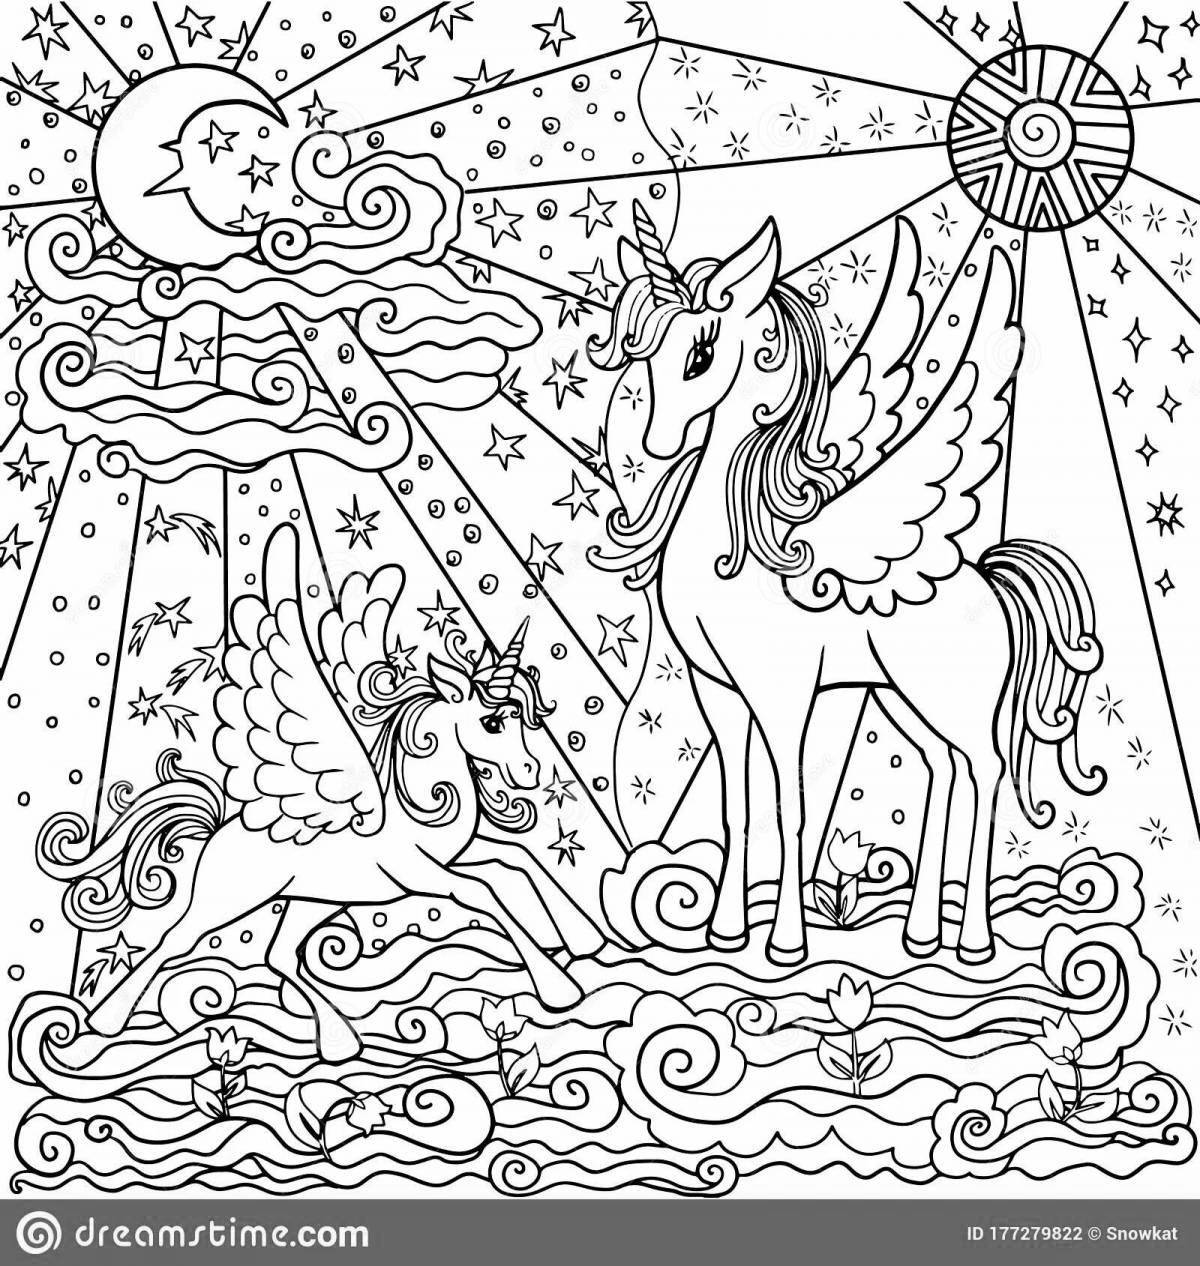 Playful unicorn coloring by numbers for kids